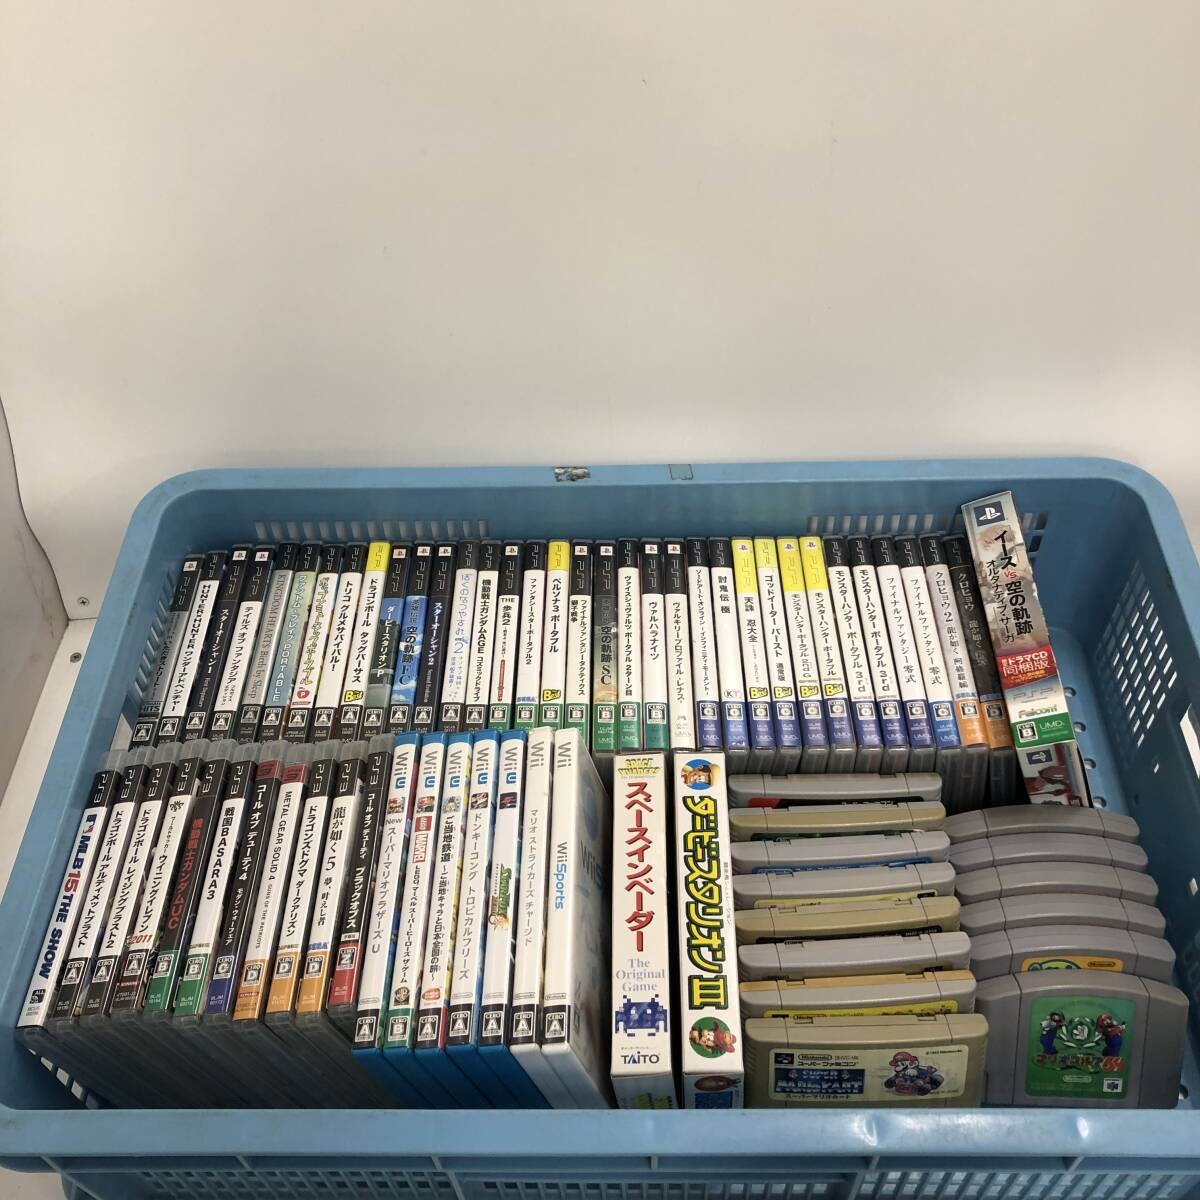 [1 jpy ~]PSP PS3 Wii WiiU Super Famicom other game soft 65 point and more set sale * operation not yet verification Dub li equipped [ junk ]